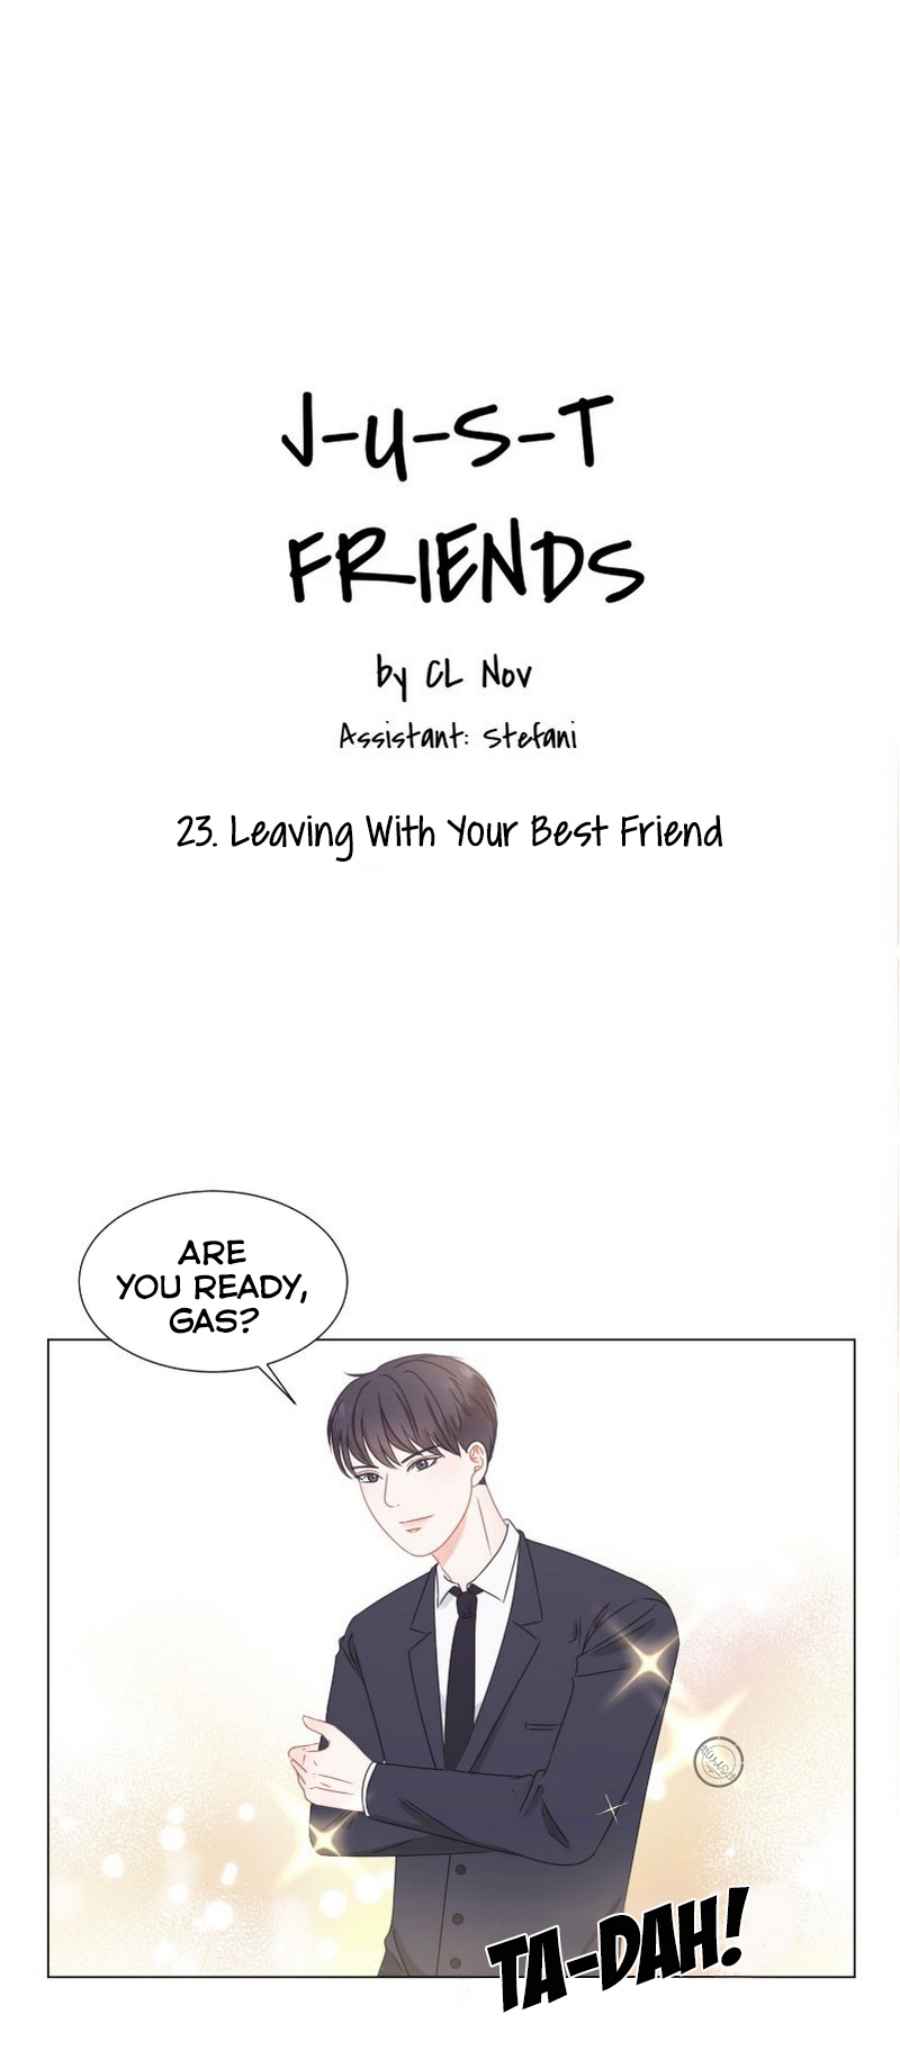 Just Friends Ch. 23 Leaving With Your Best Friend